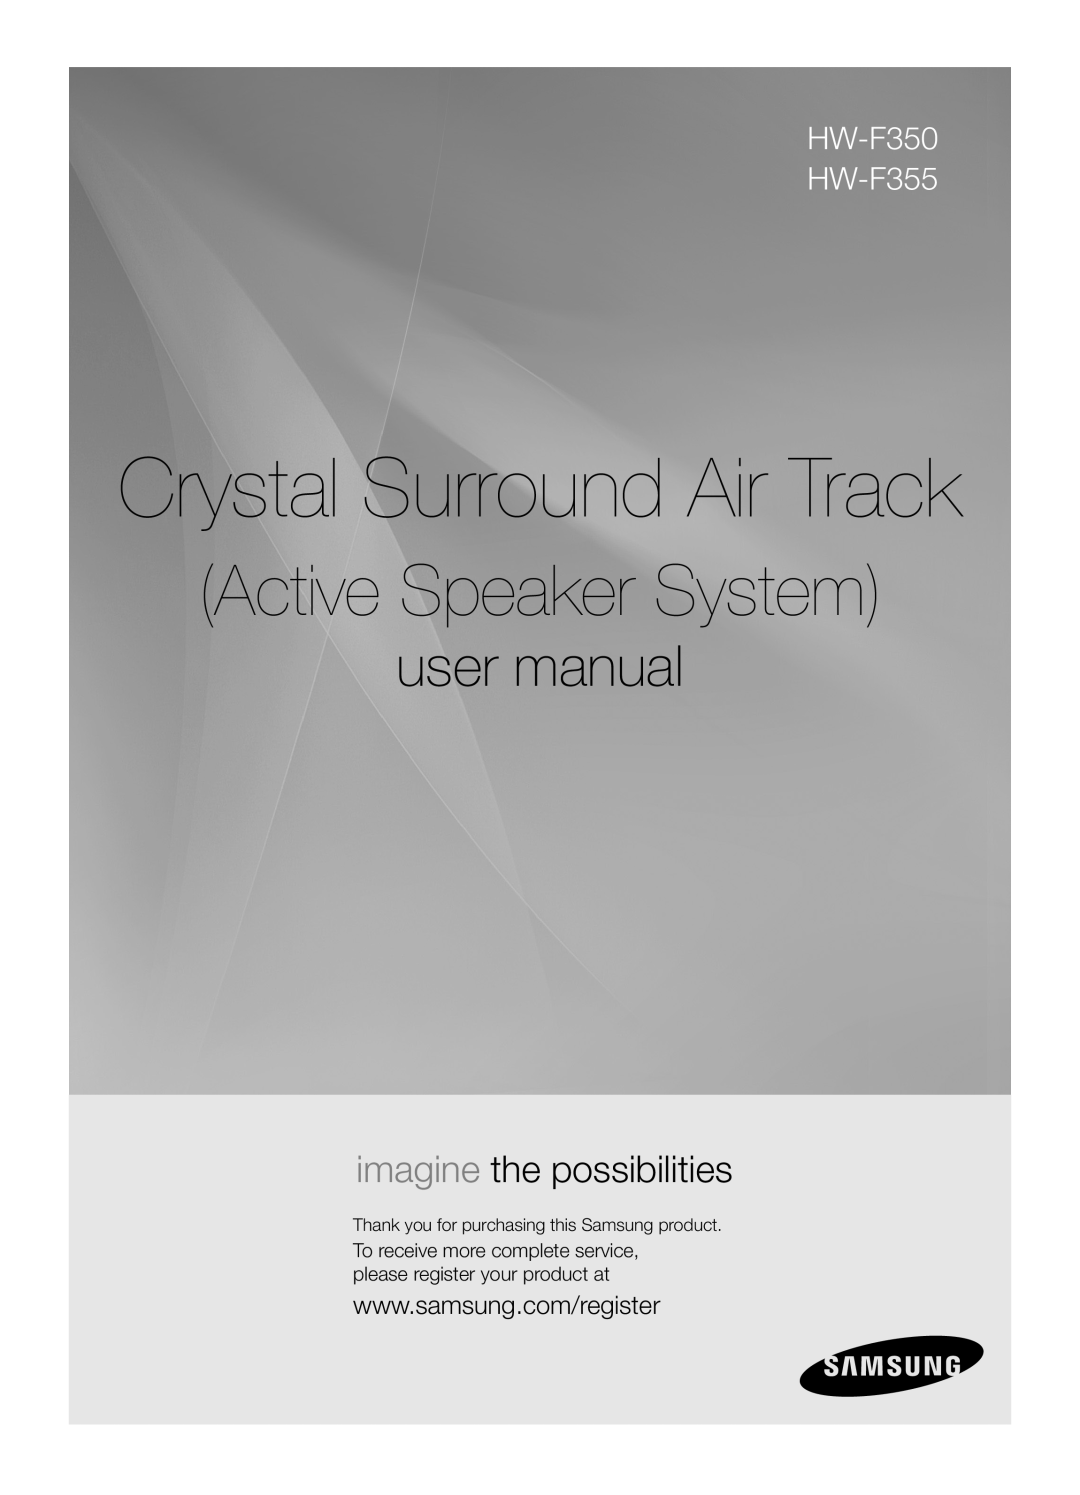 Samsung HWF355ZA user manual Crystal Surround Air Track, Active Speaker System, imagine the possibilities, HW-F350 HW-F355 